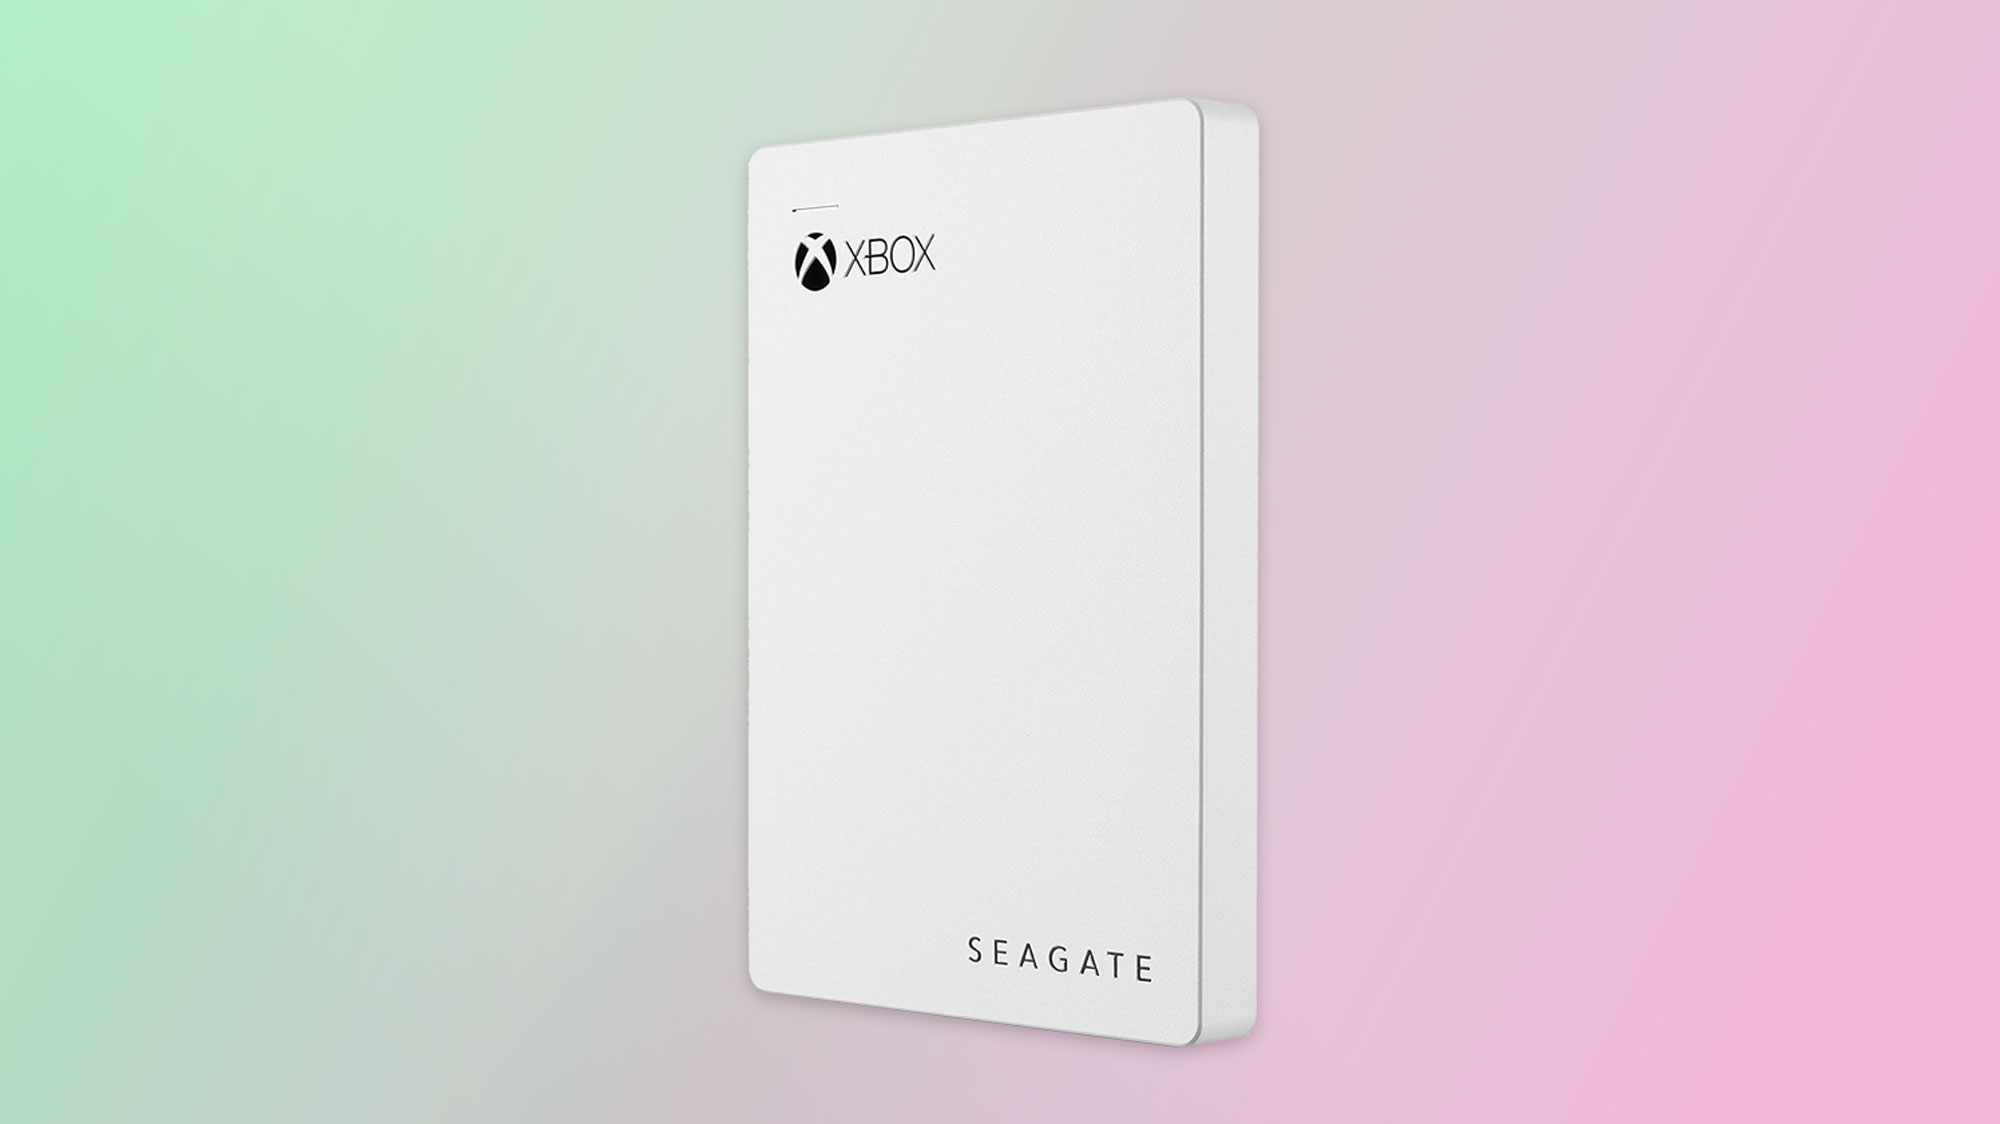 Best external hard drives: Seagate Game Drive for Xbox